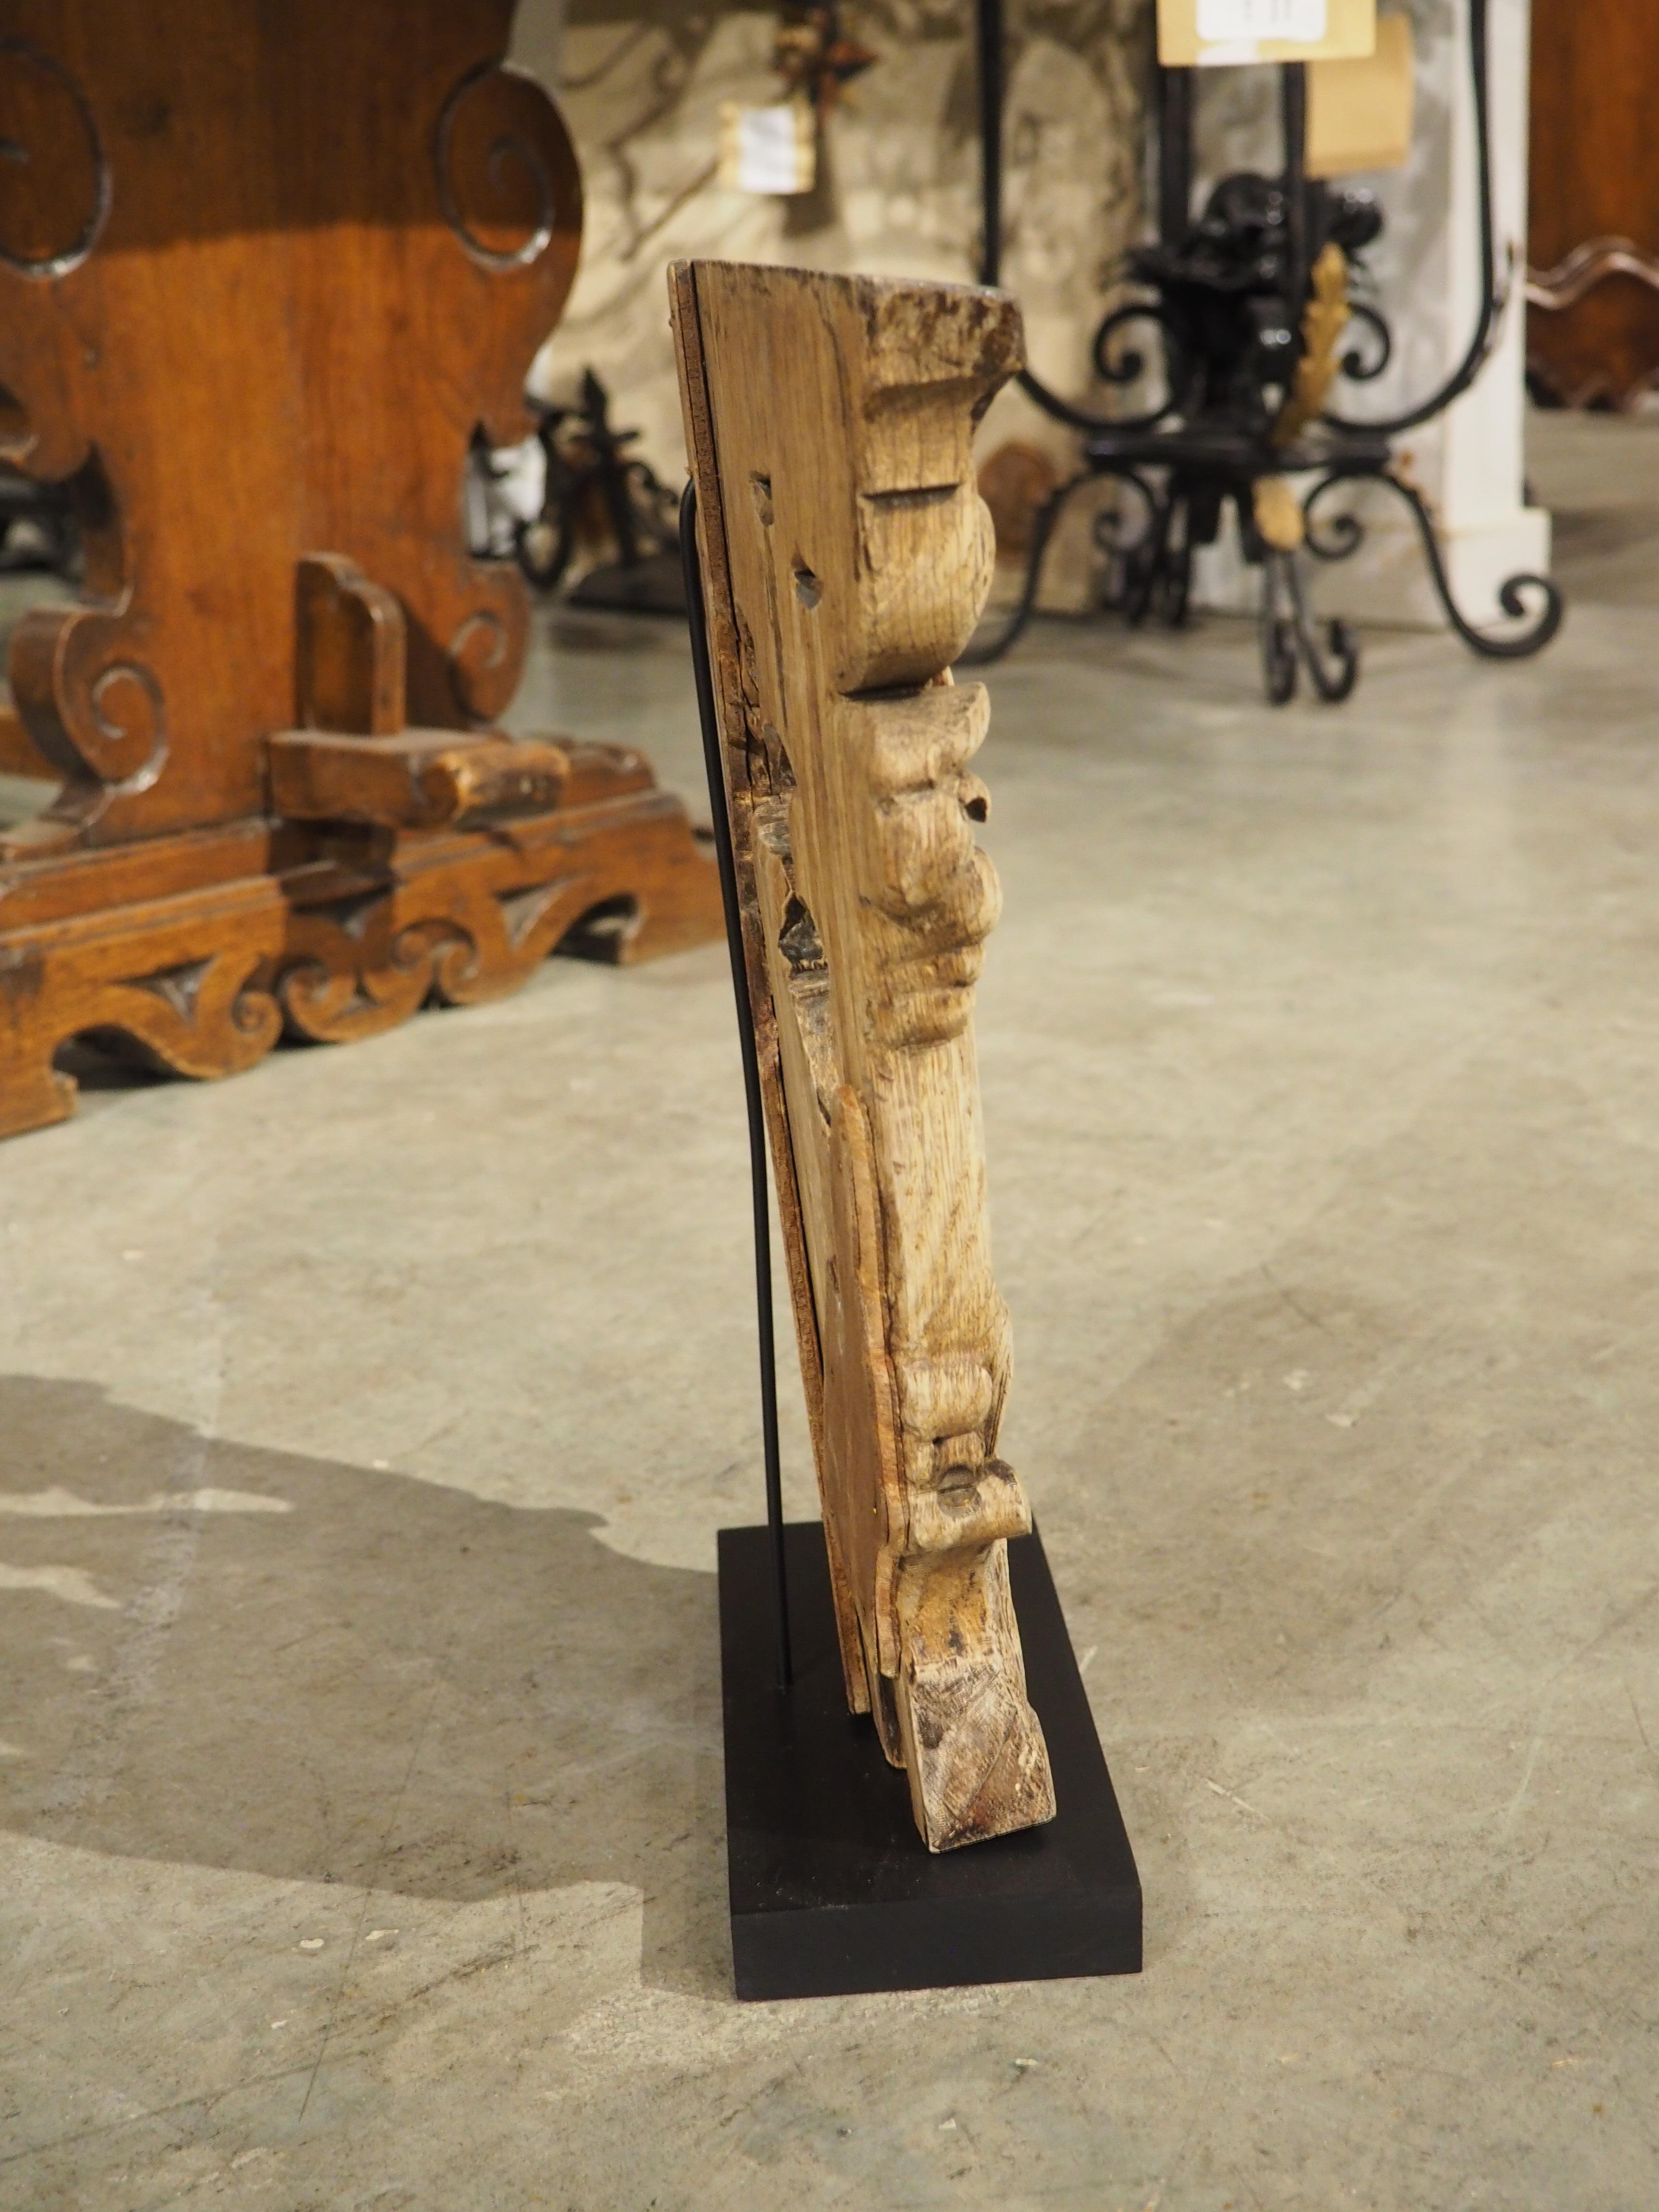 Most likely originally part of a larger installation or highly carved furniture, this charming oak capital is from Flanders, which is part of modern-day Belgium. Hand-carved circa 1800, the original finish has been washed and the carving was mounted